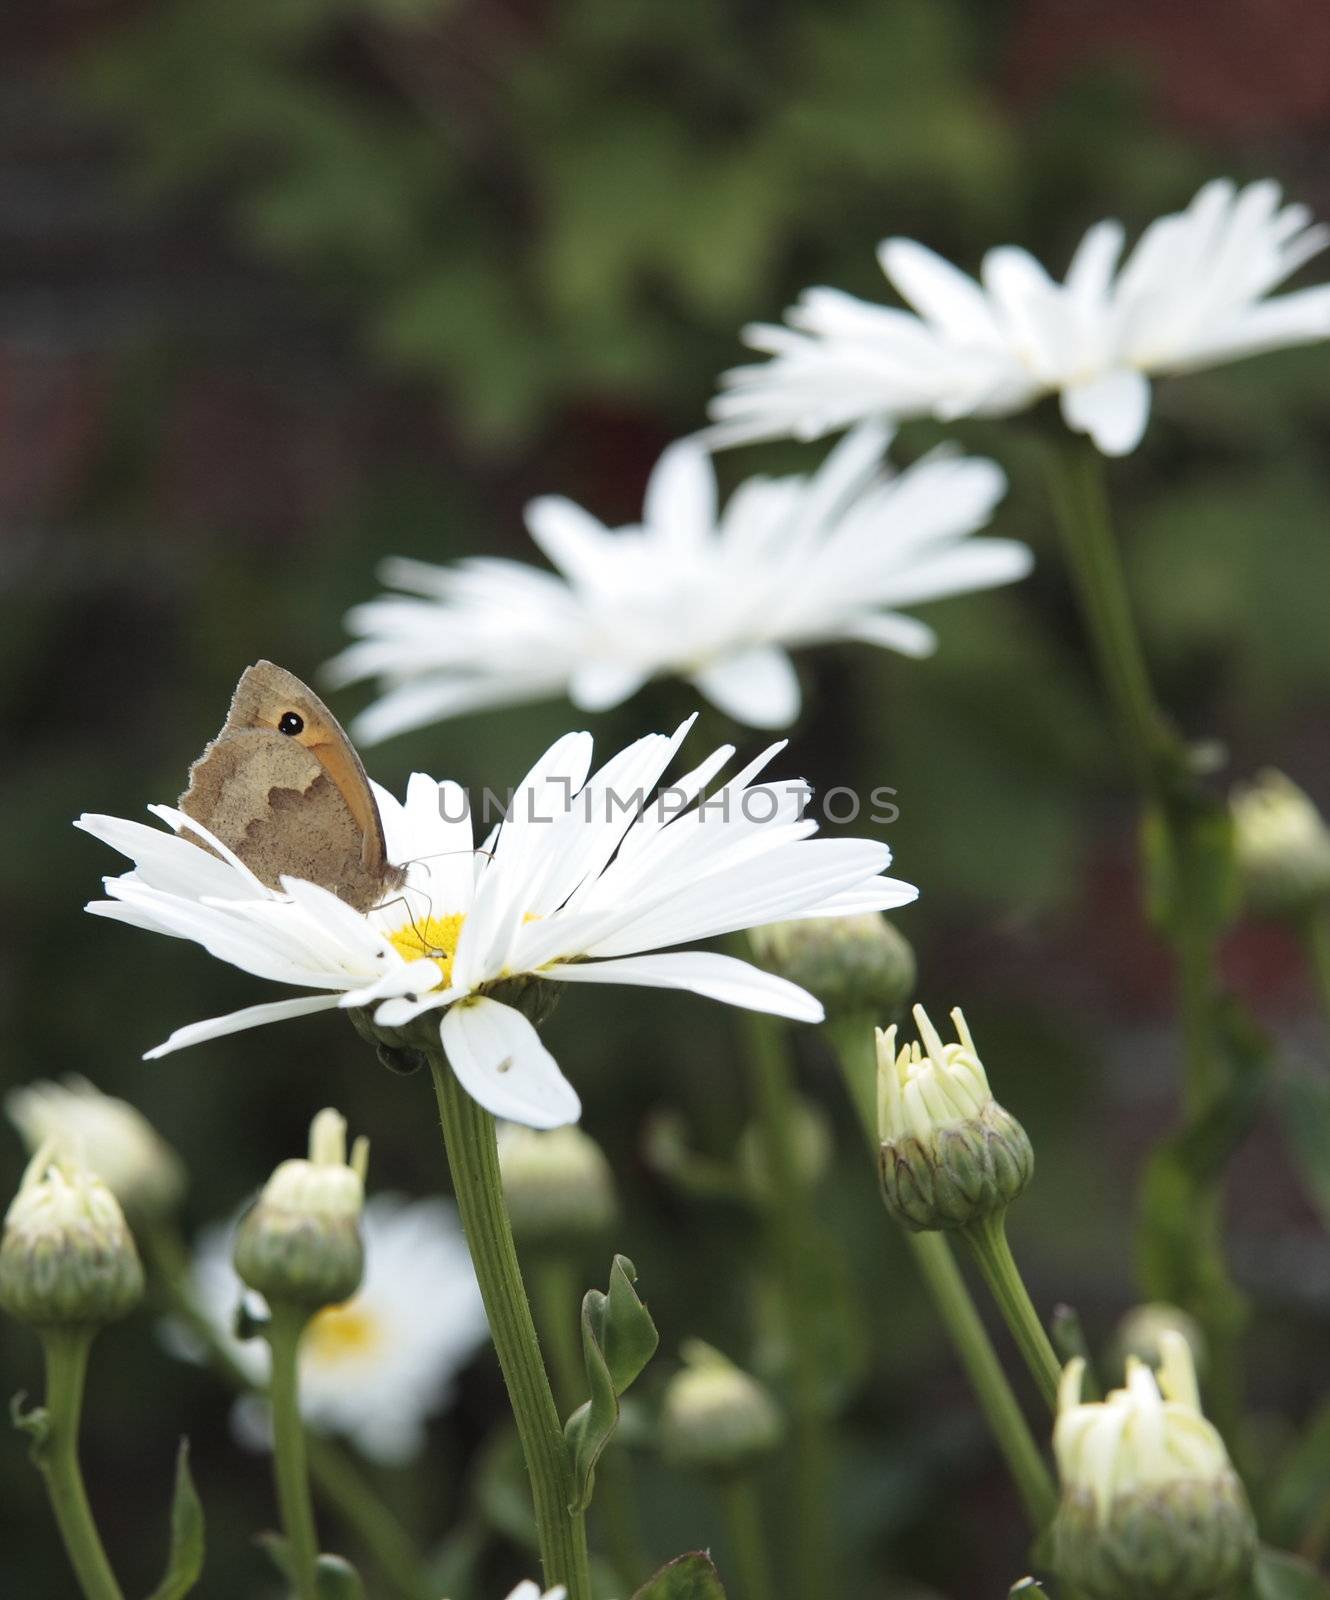 brown butterfly on white daisies growing in the garden